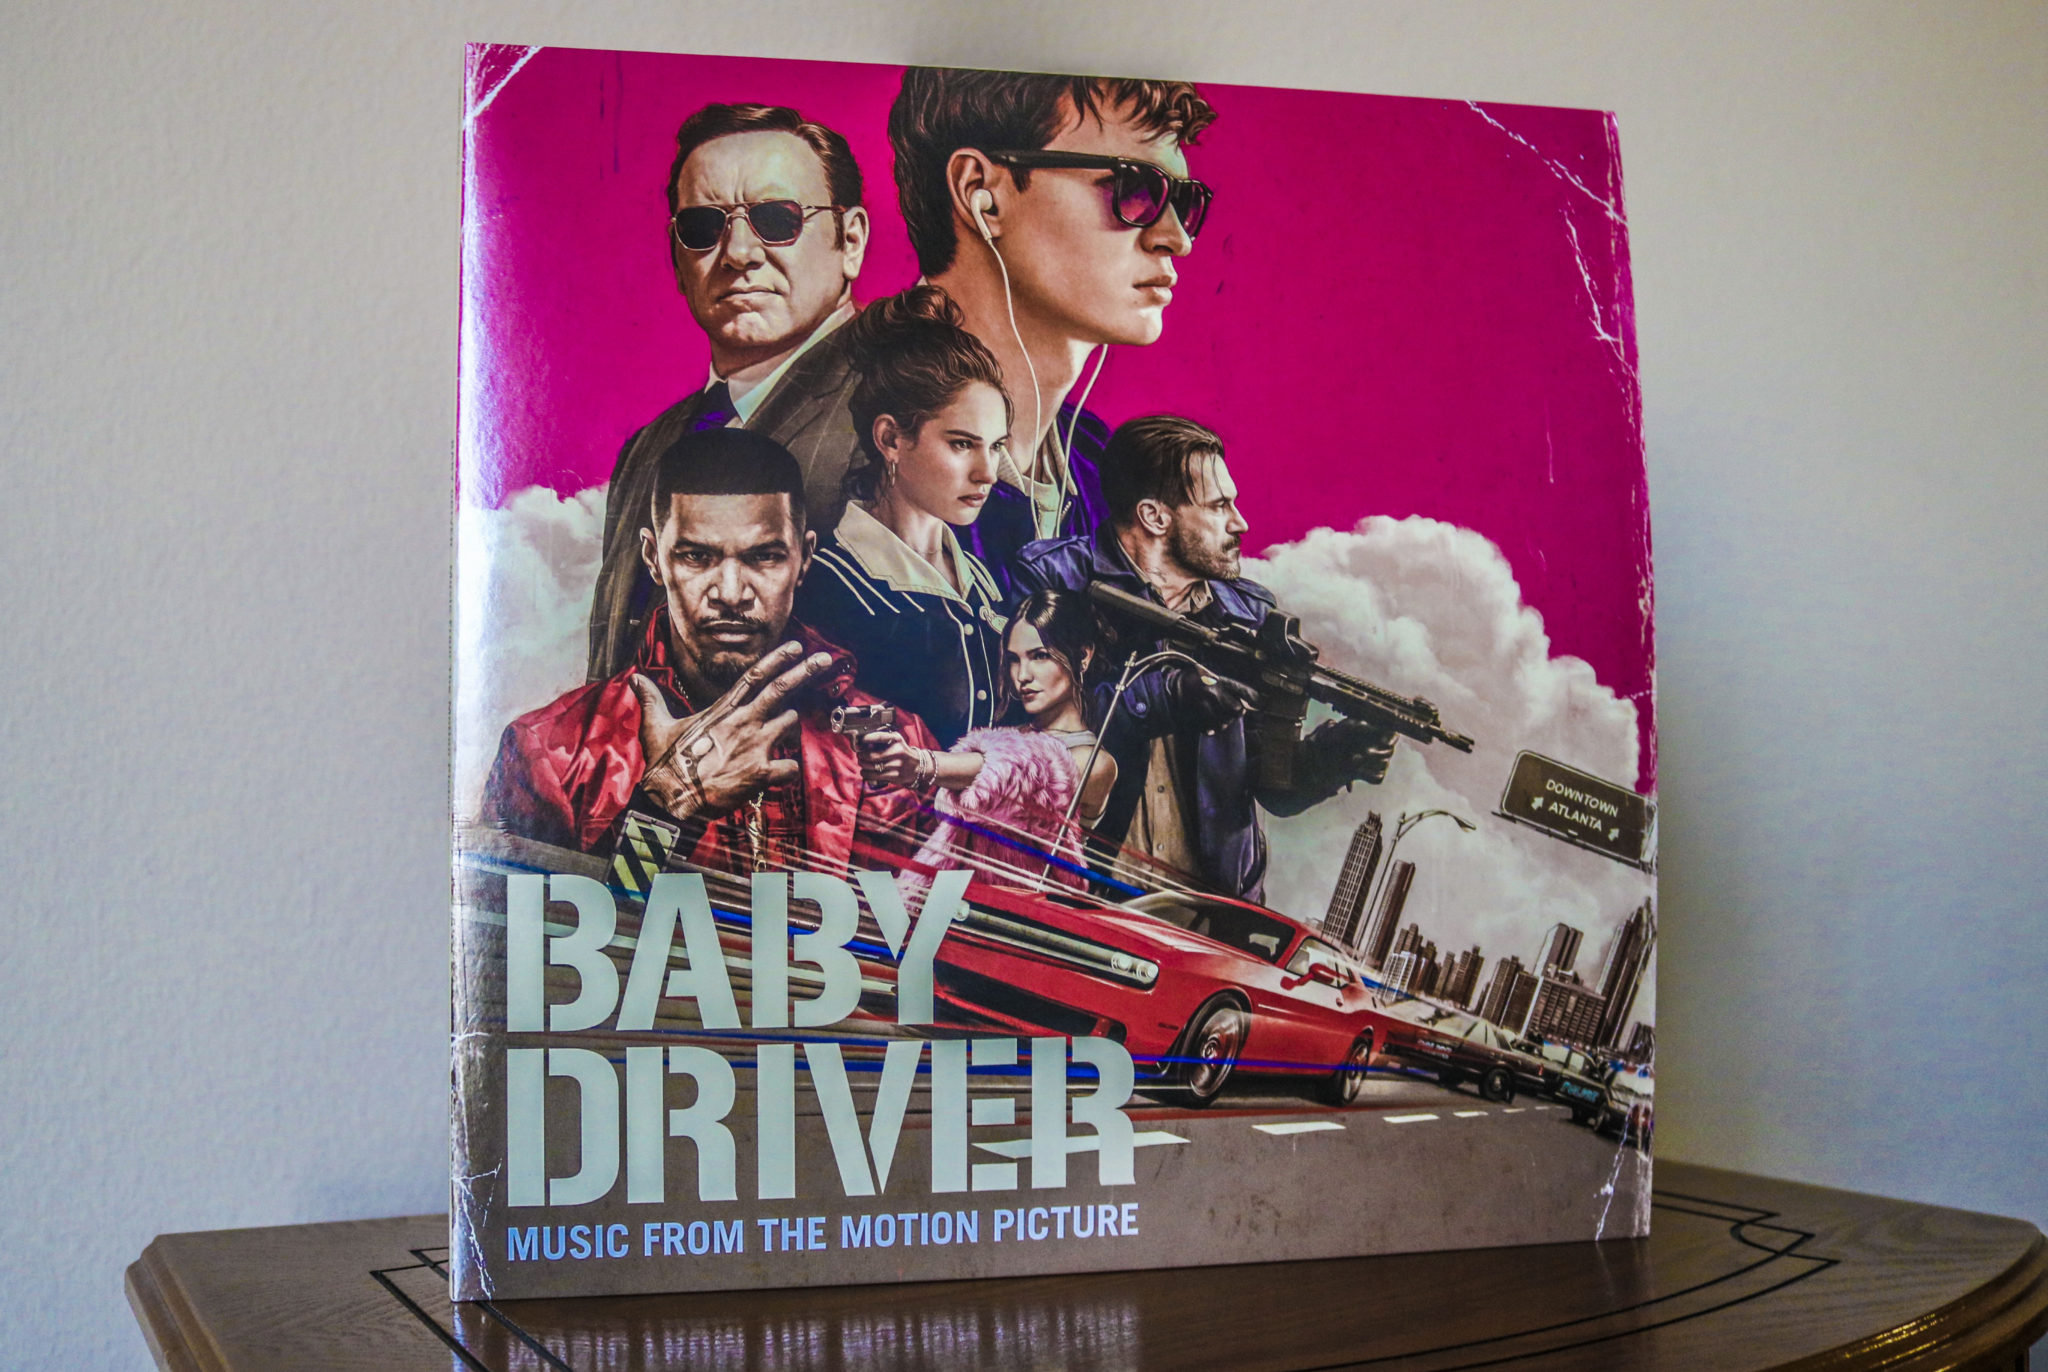 A look at the Vinyl Soundtrack for Baby Driver.